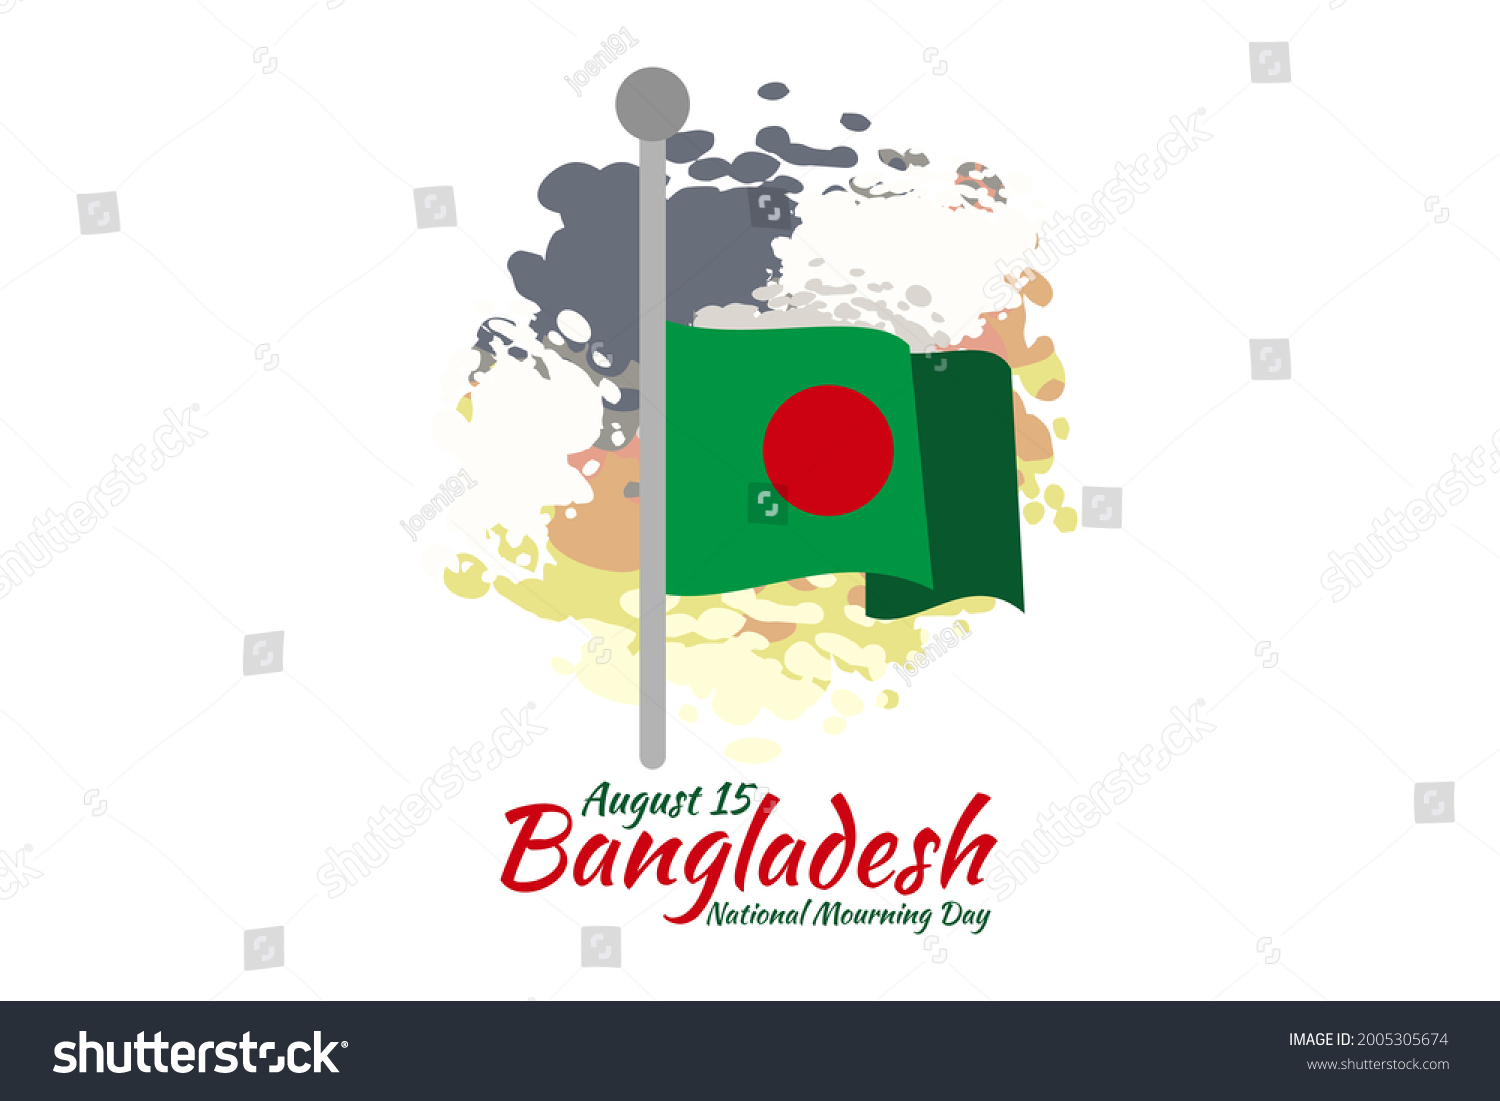 SVG of August 15, National Mourning Day of Bangladesh poster vector illustration. Suitable for greeting card, poster and banner. svg